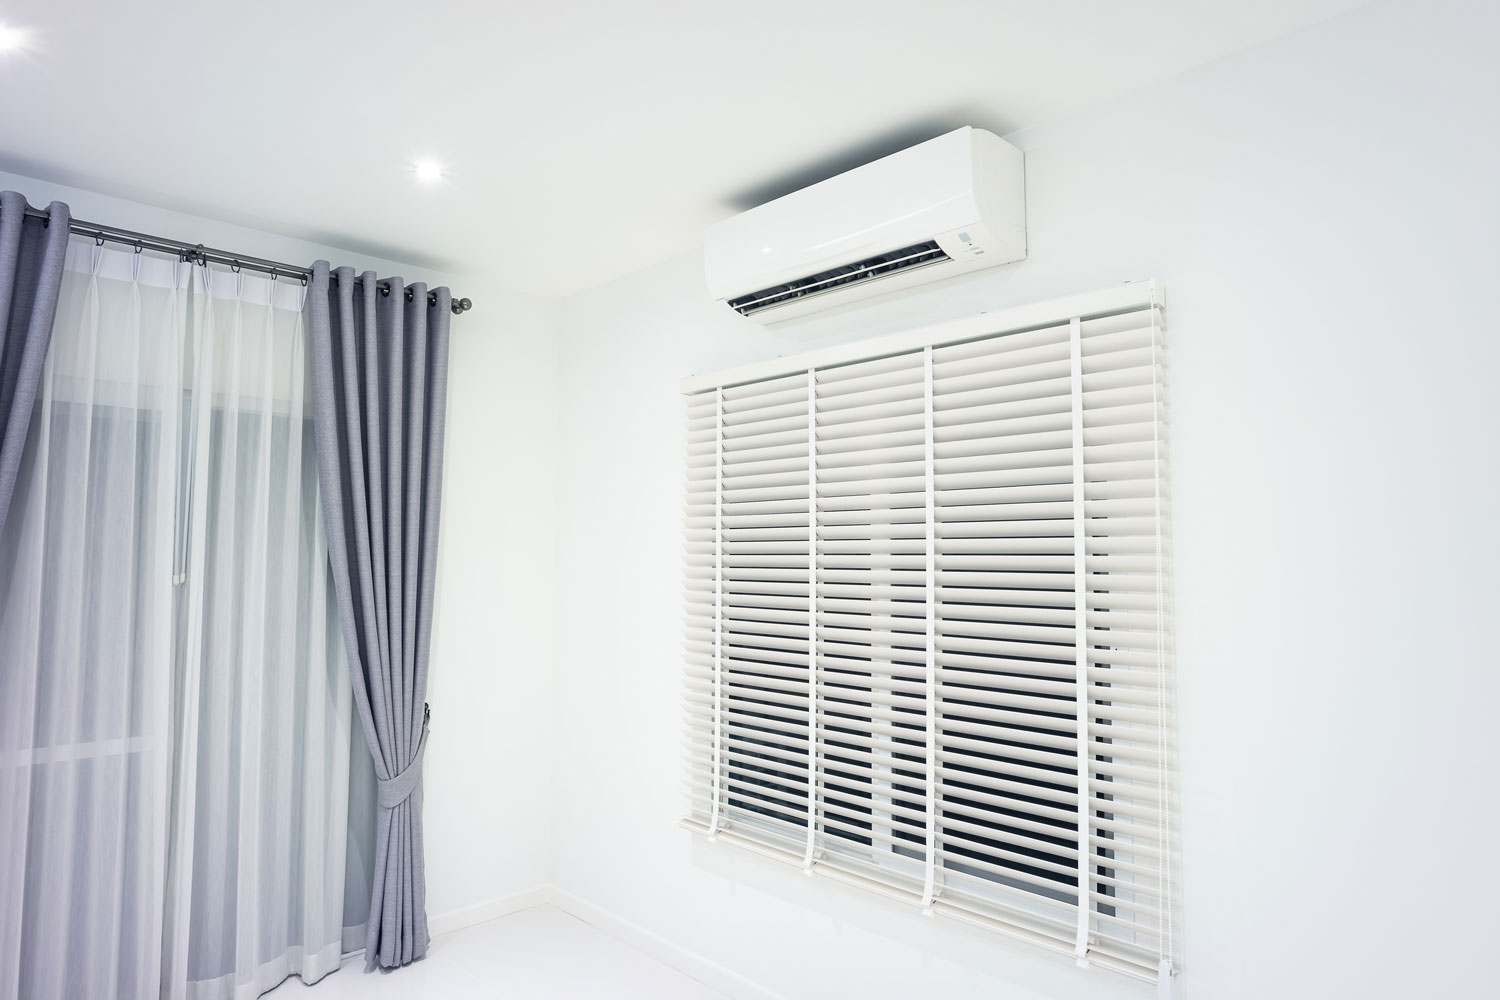 A mini split air conditioning unit mounted on top of the window